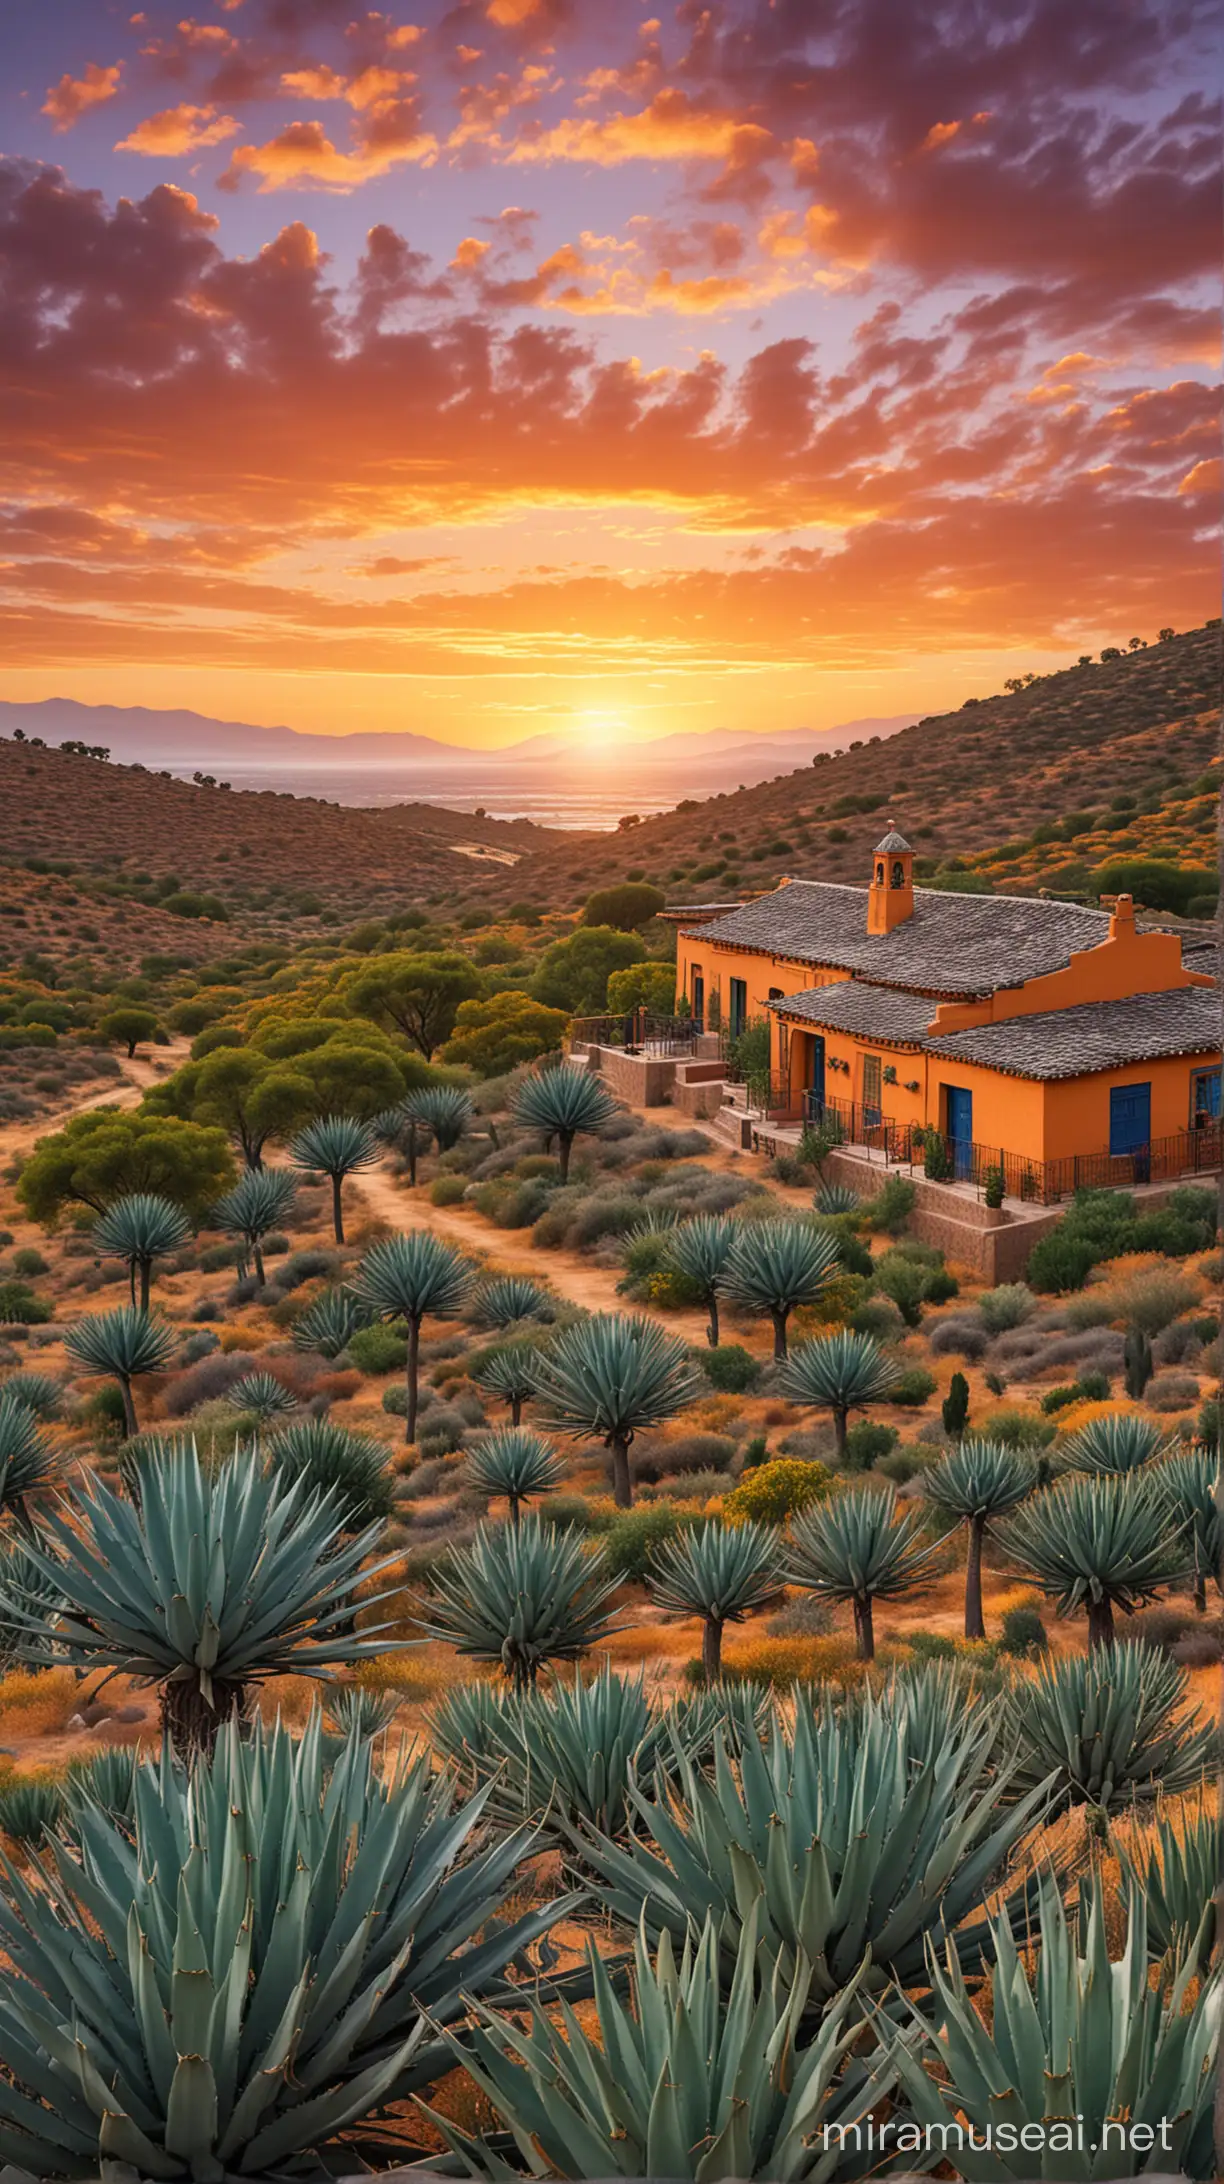 Golden Sunset Over Mexican Agave Field with Stone Houses